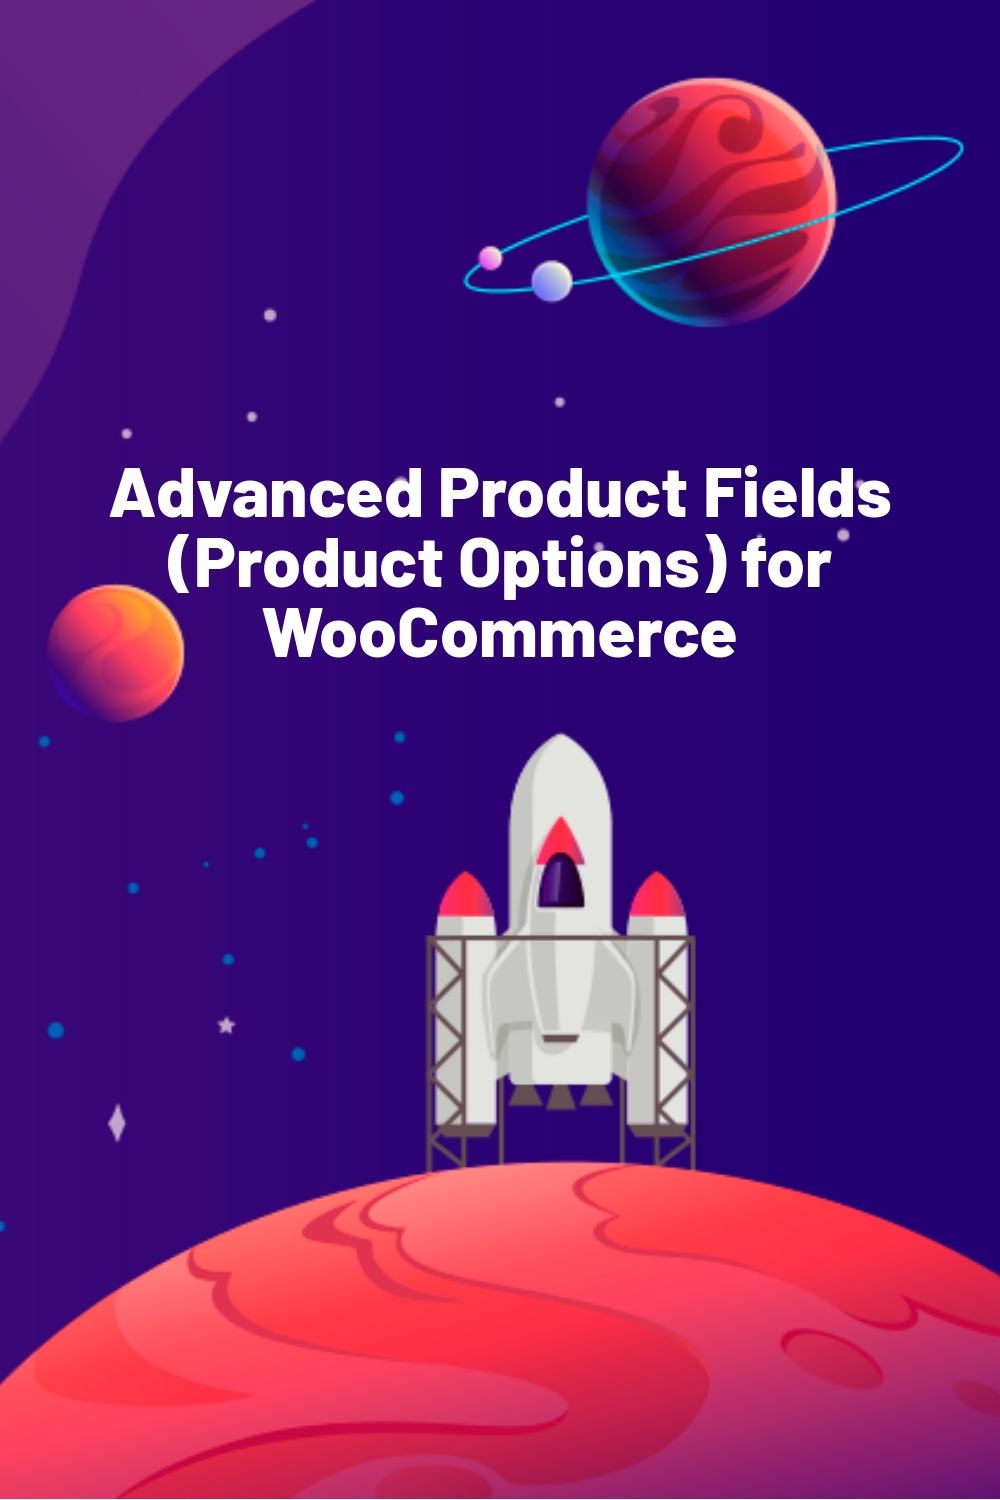 Advanced Product Fields (Product Options) for WooCommerce